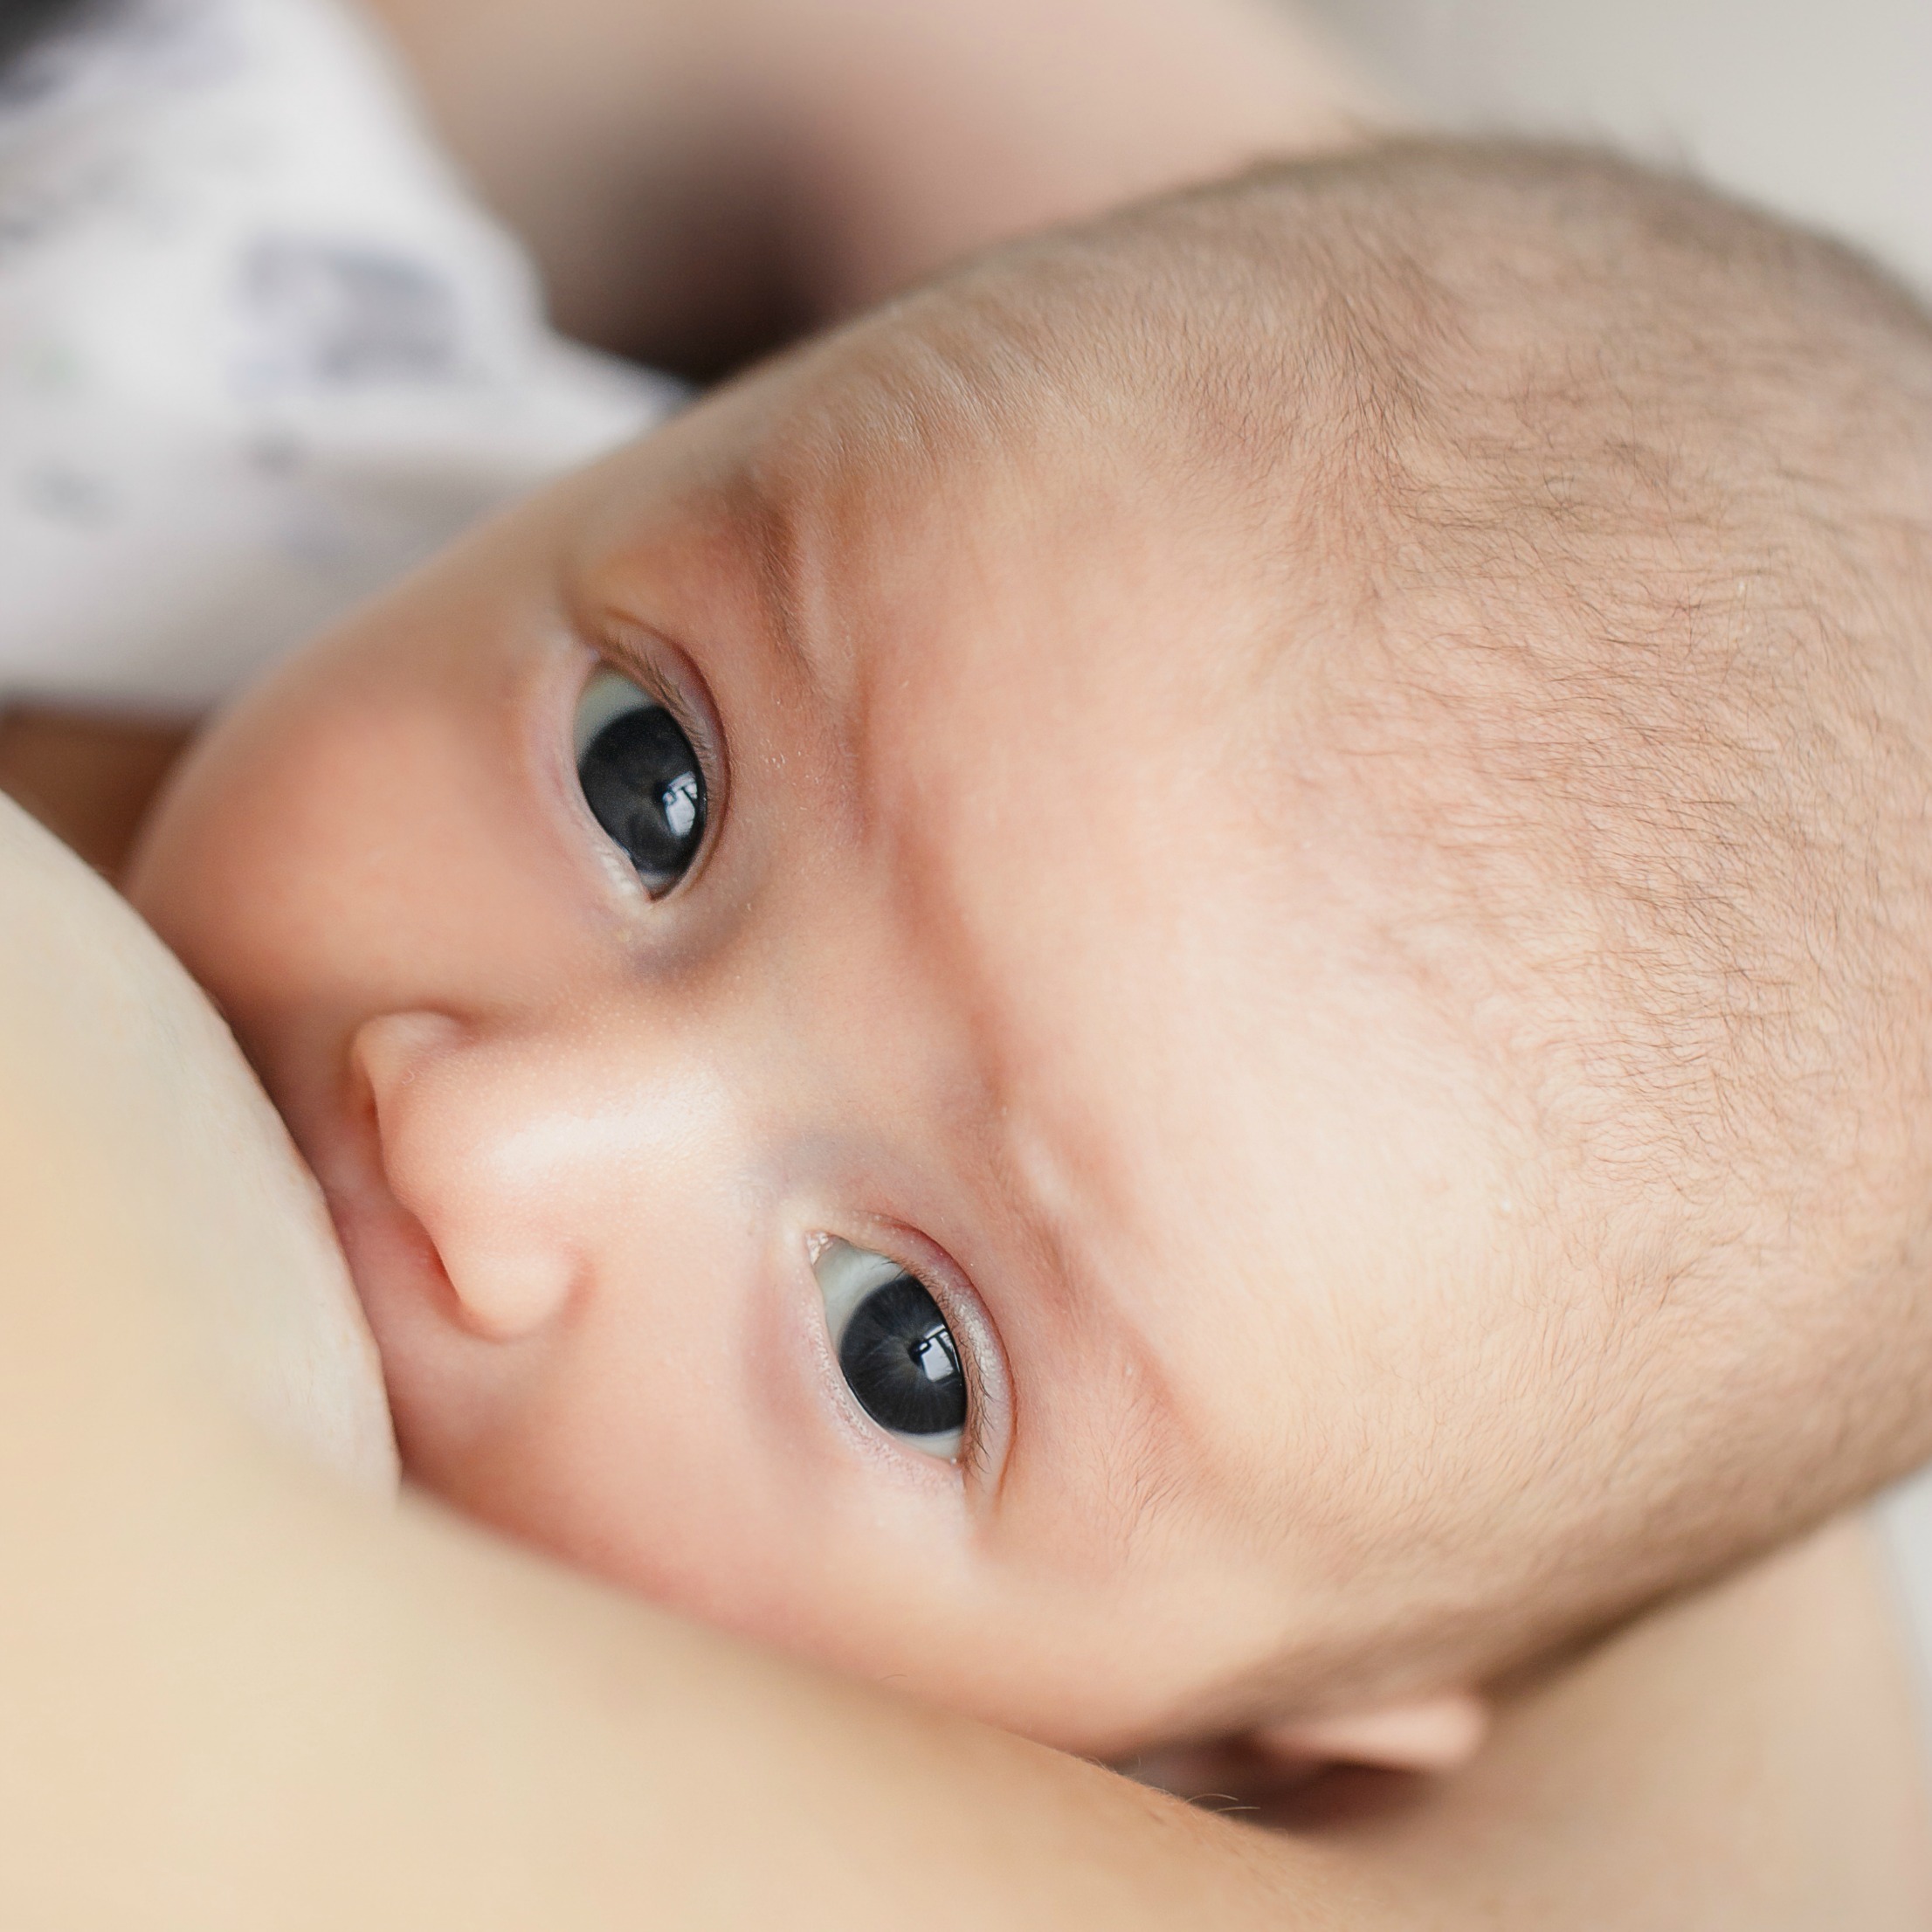 The One Phrase a Breastfeeding Mom Should Never Say